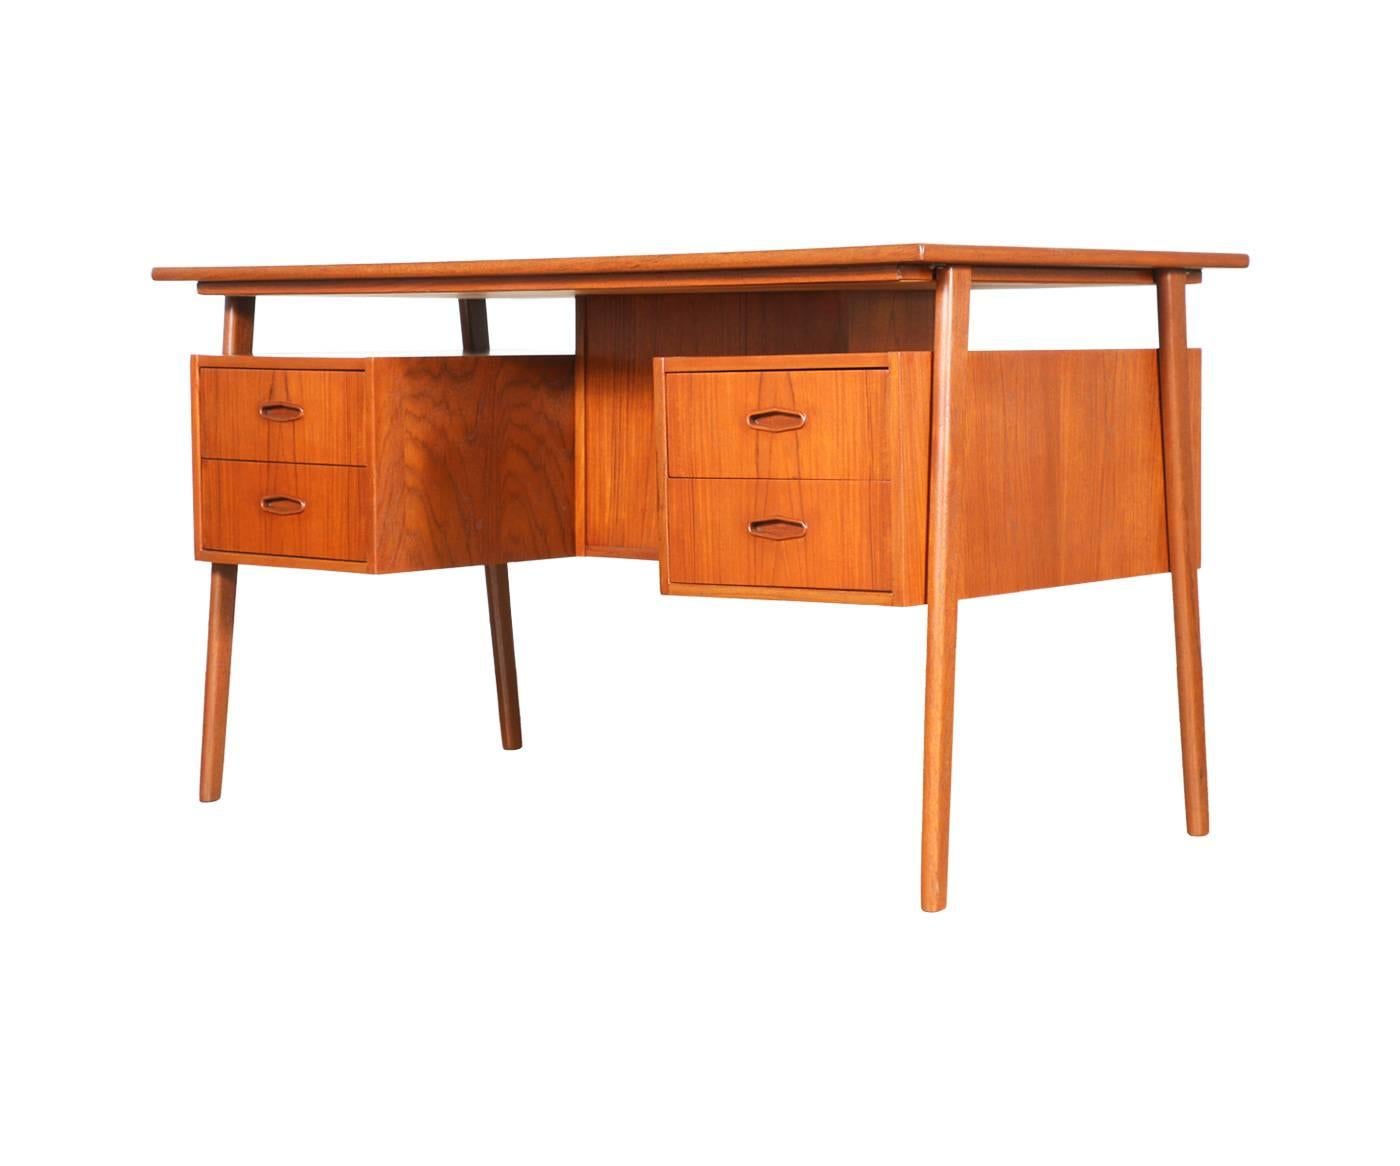 Designer: Unknown.
Manufacturer: Unknown.
Period/Style: Danish Modern.
Country: Denmark.
Date: 1960s.

Dimensions: 28.75″ H x 51″ W x 27″ D.
Materials: Teak.
Condition: Excellent, newly refinished.
Number of items: One.
ID number: 4299.